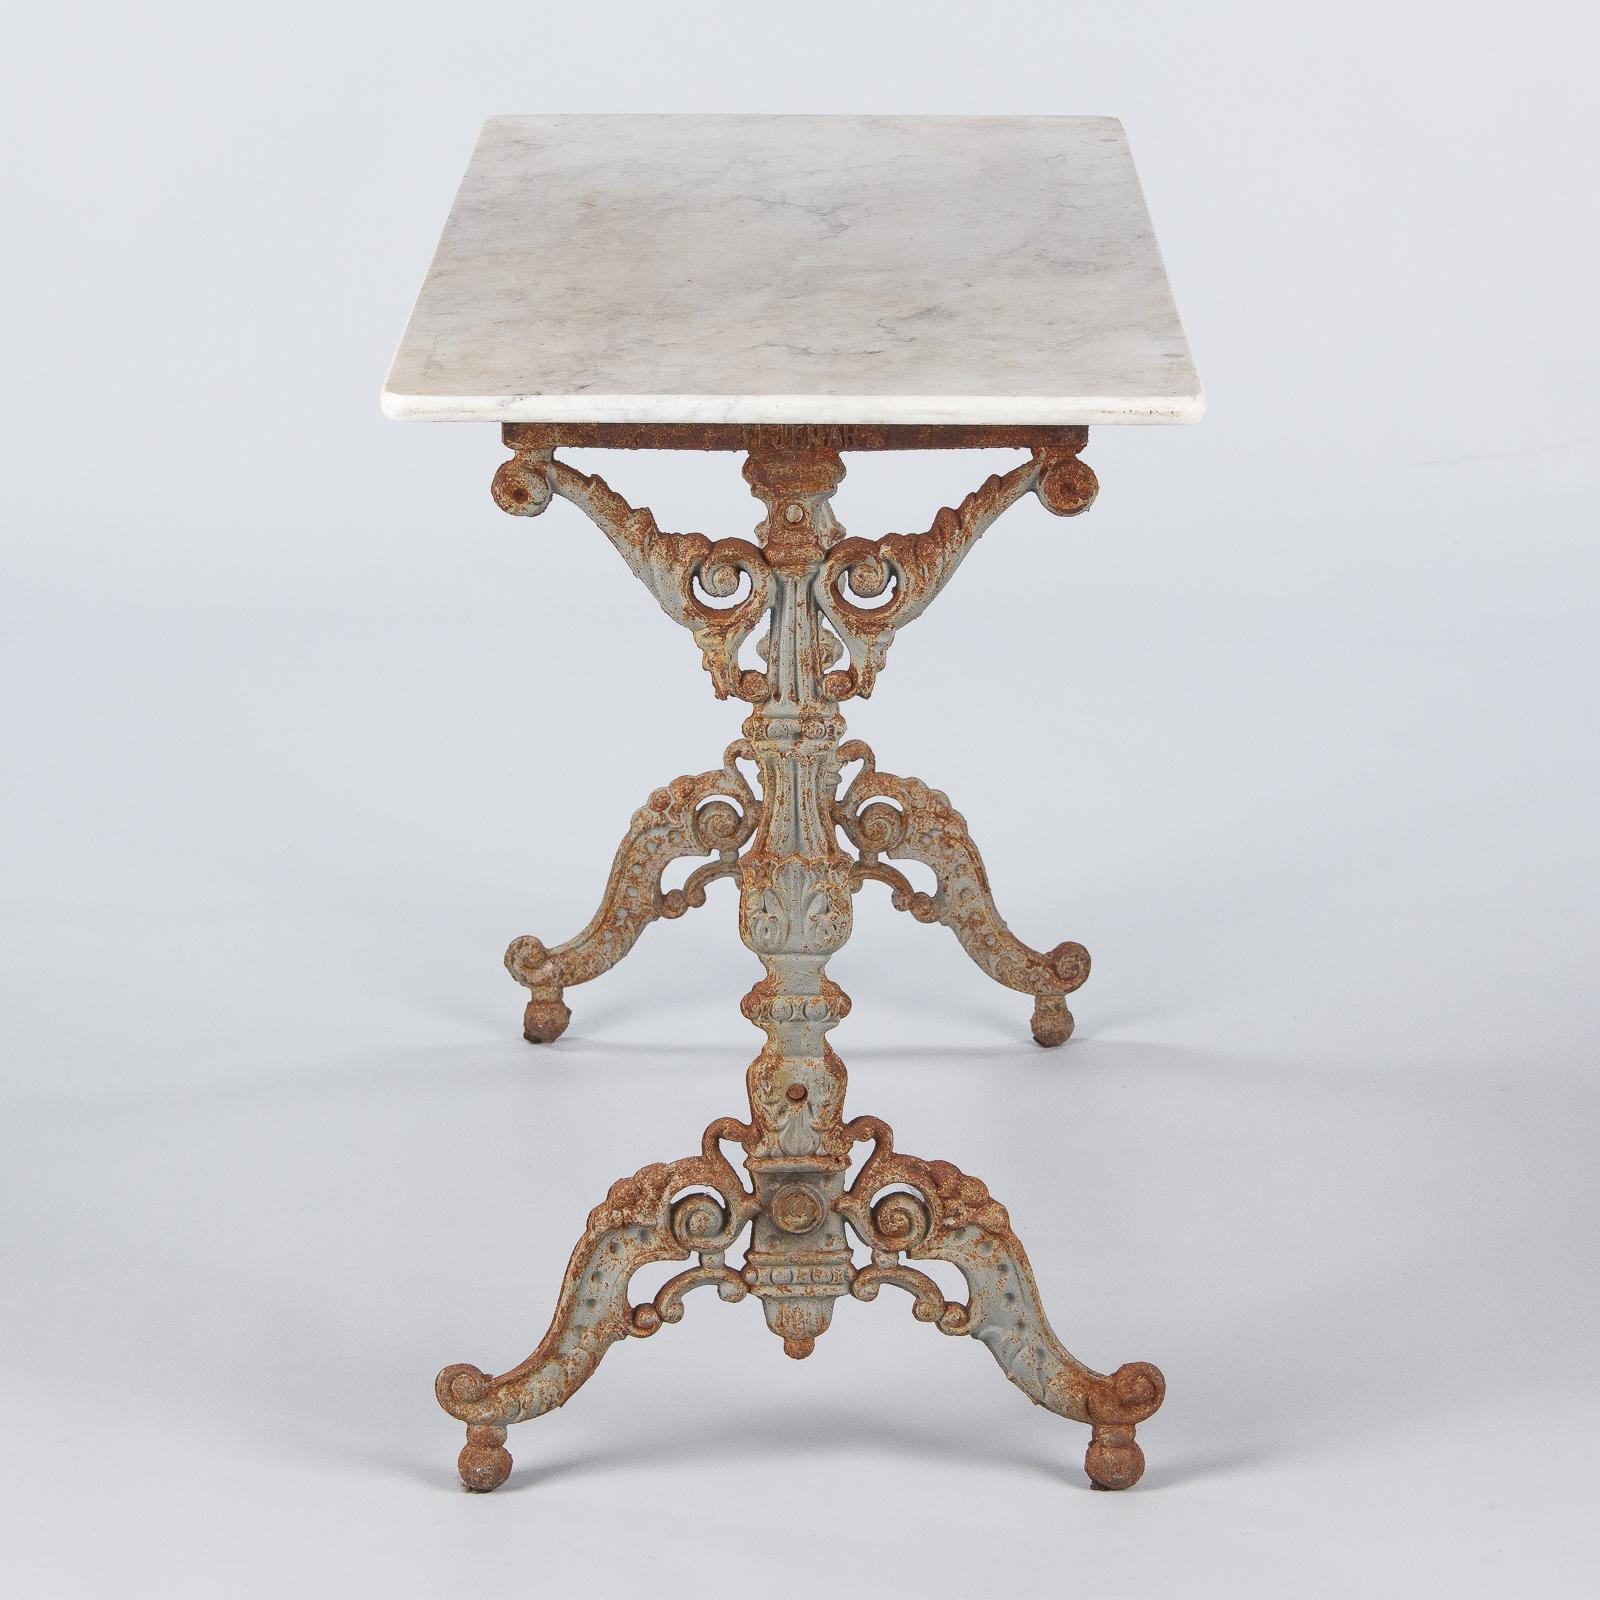 Rococo Revival Spanish Rococo Iron Base Bistro Table with Marble Top, Late 1800s